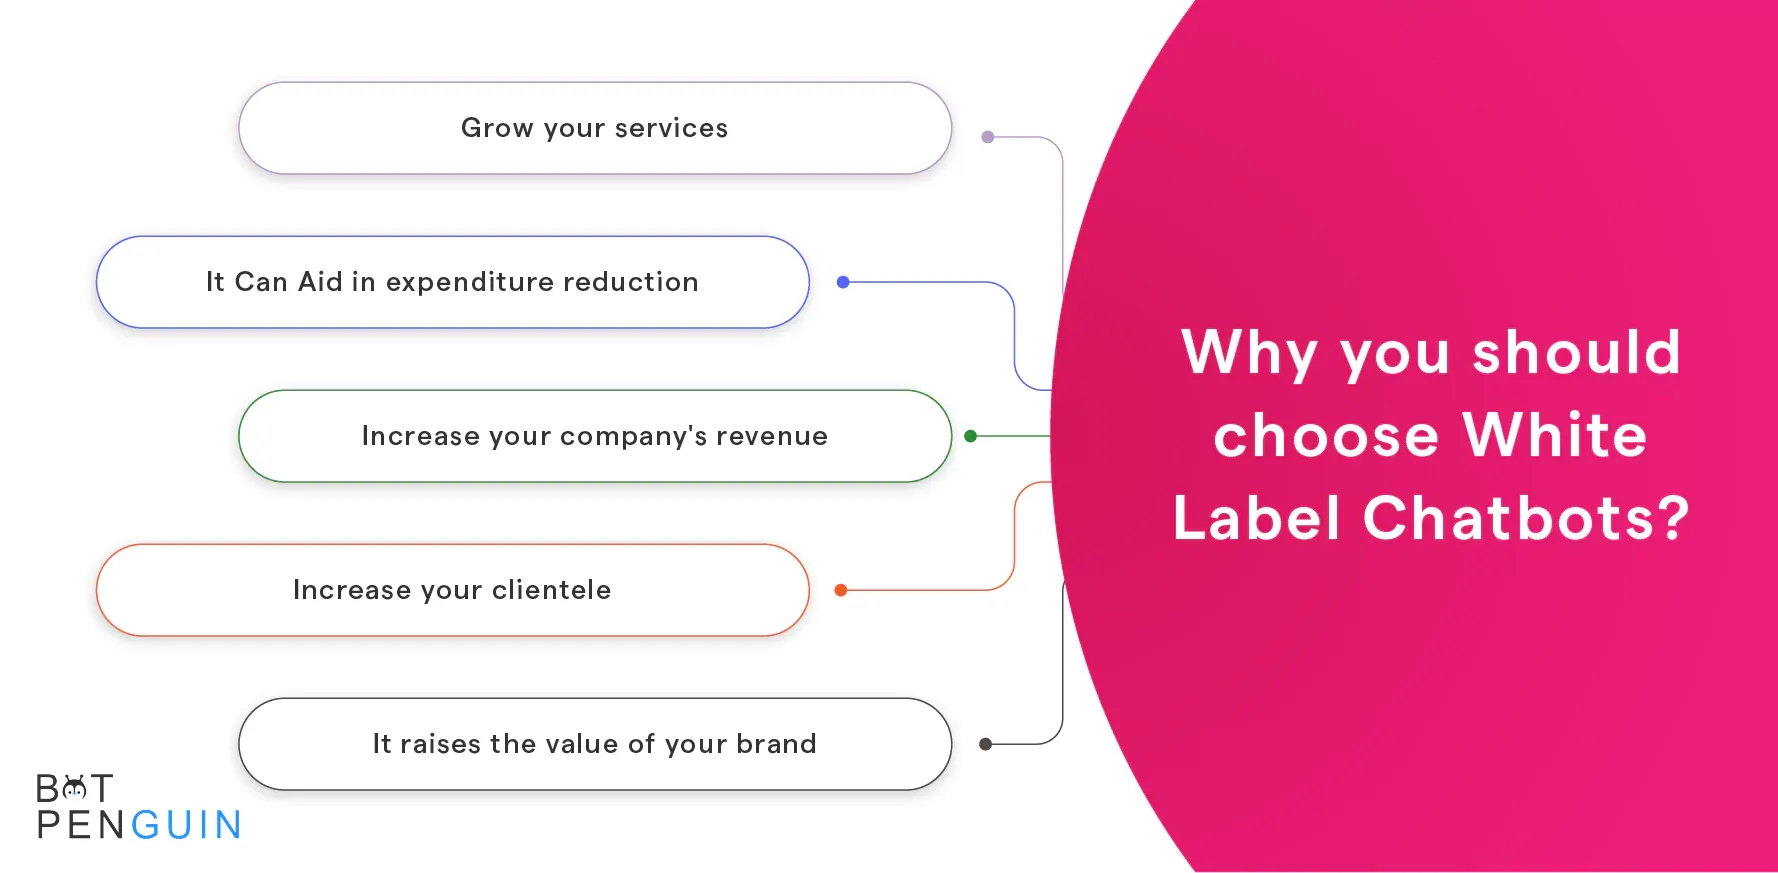 Tips and tricks to know before investing in White Label Partnership